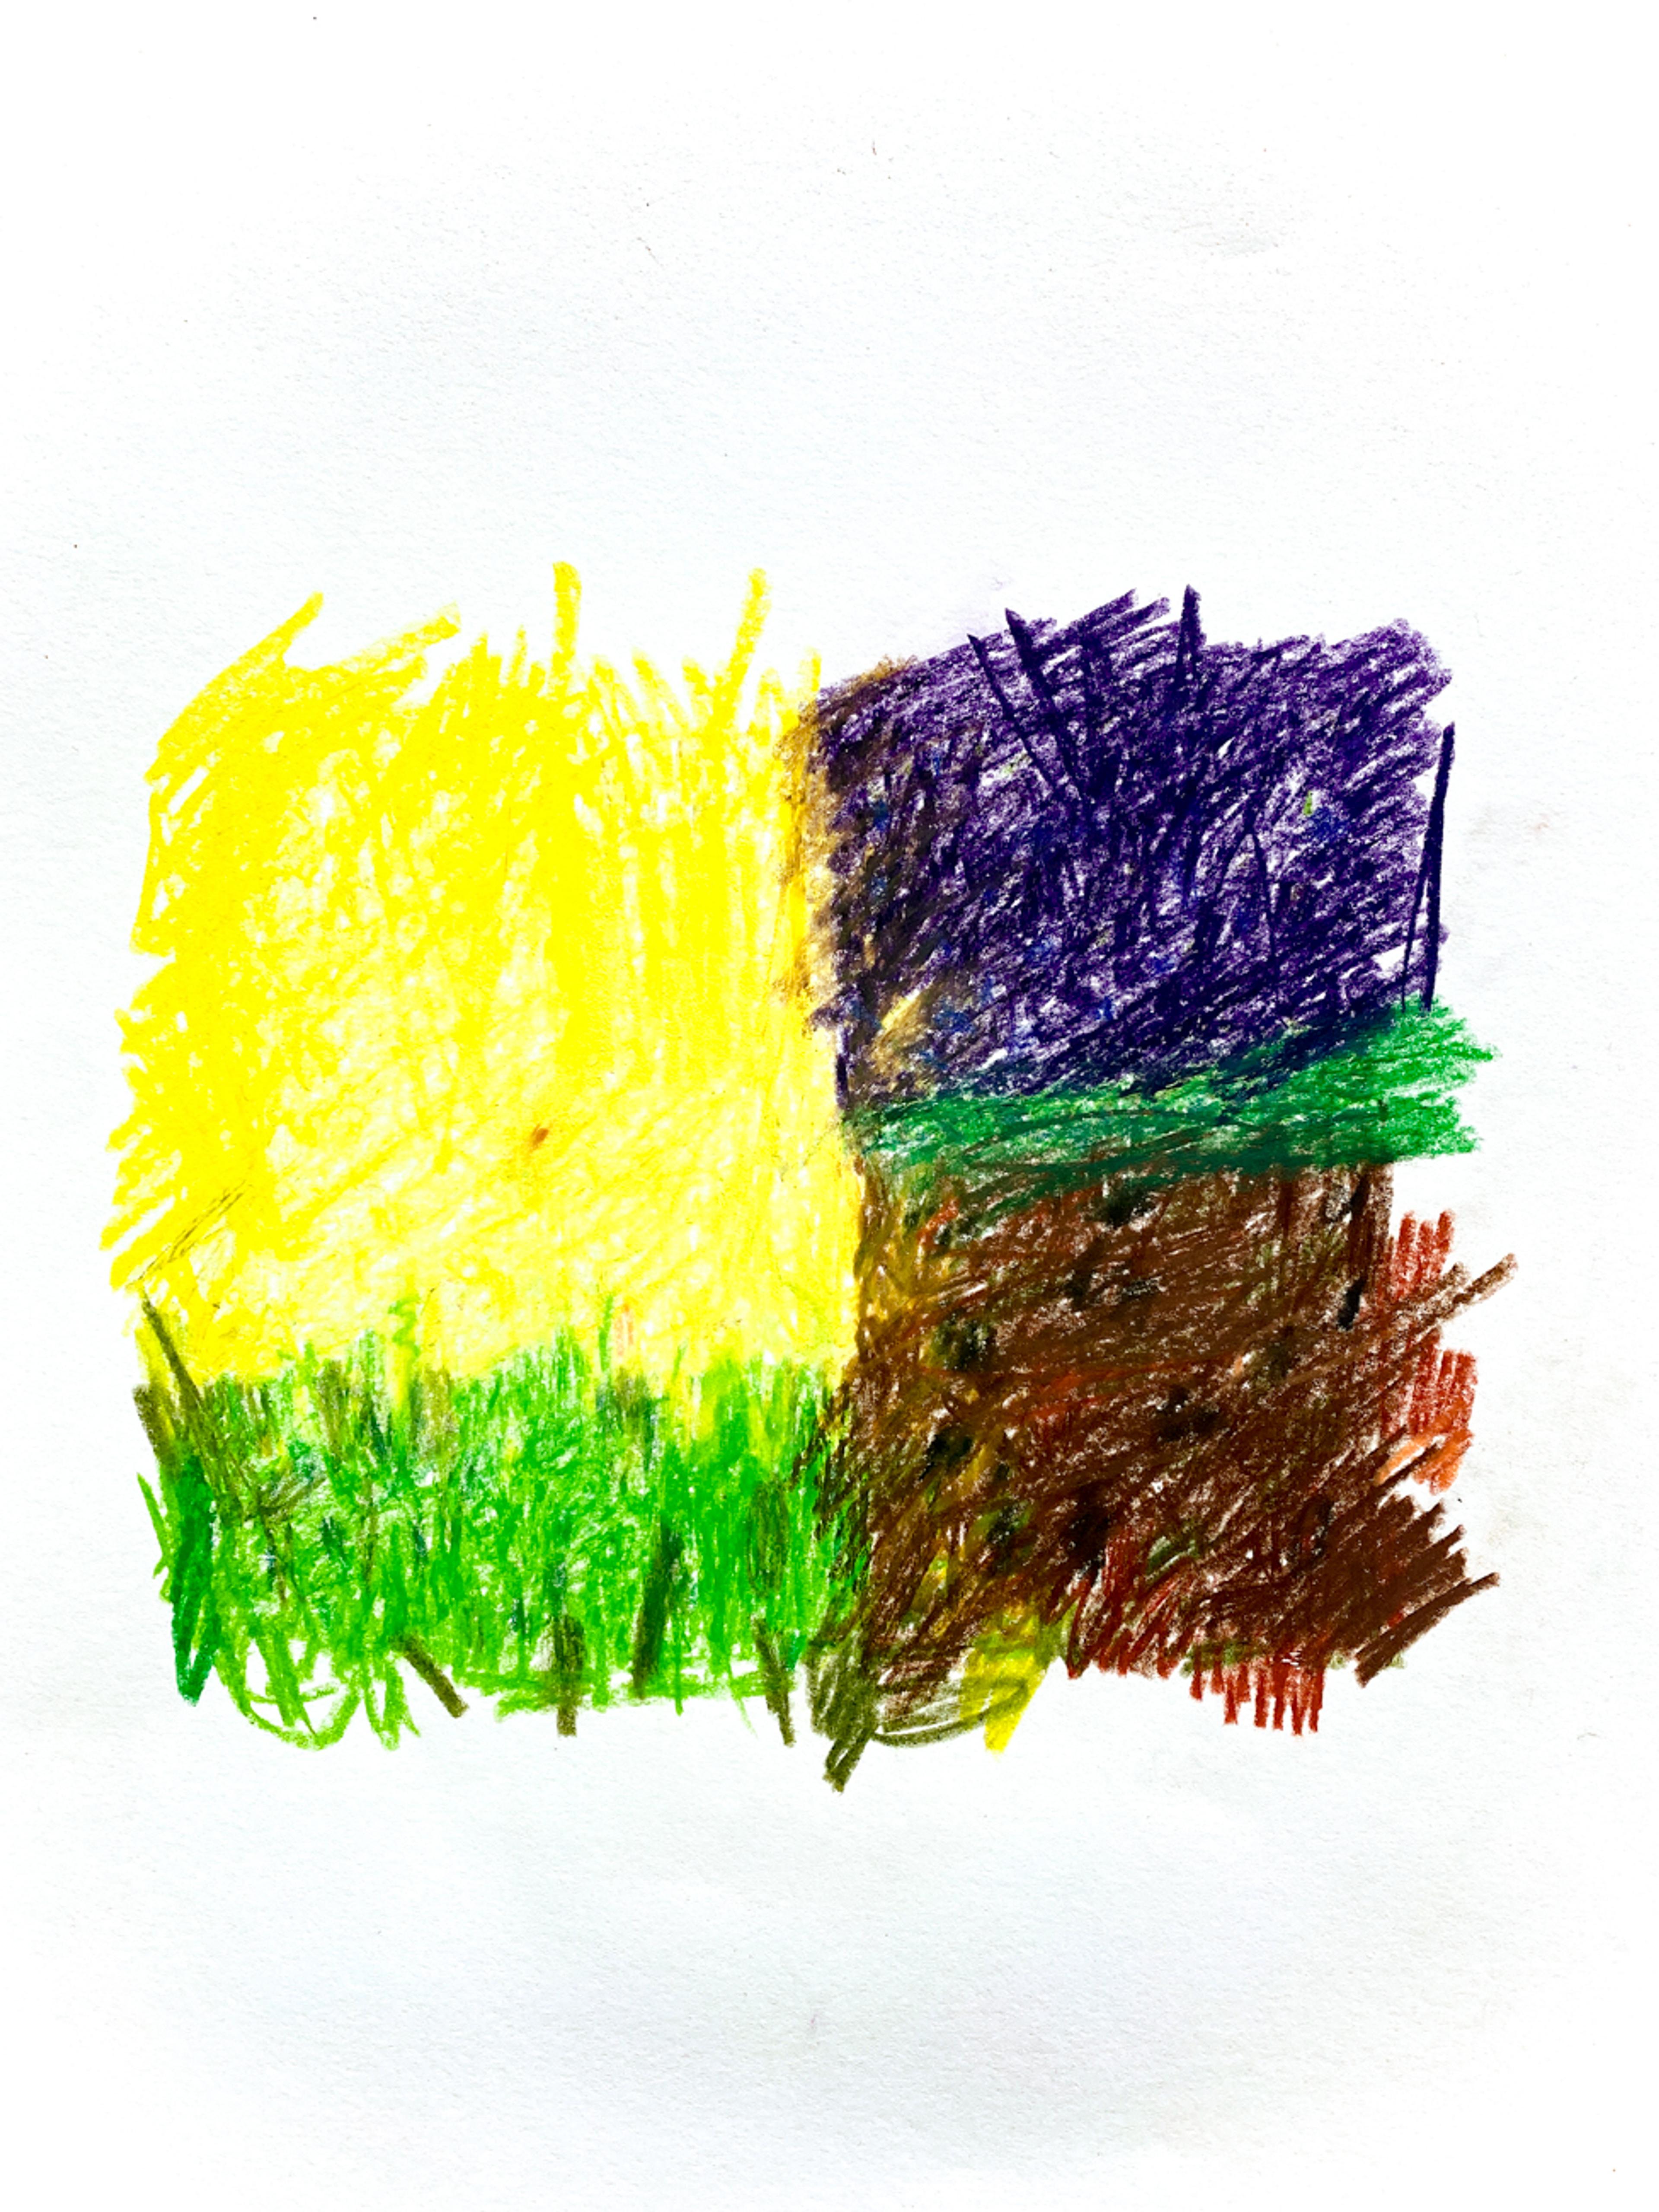 Blocks of colour fill the page, strong yellow, purple and green. It reassembles fields.